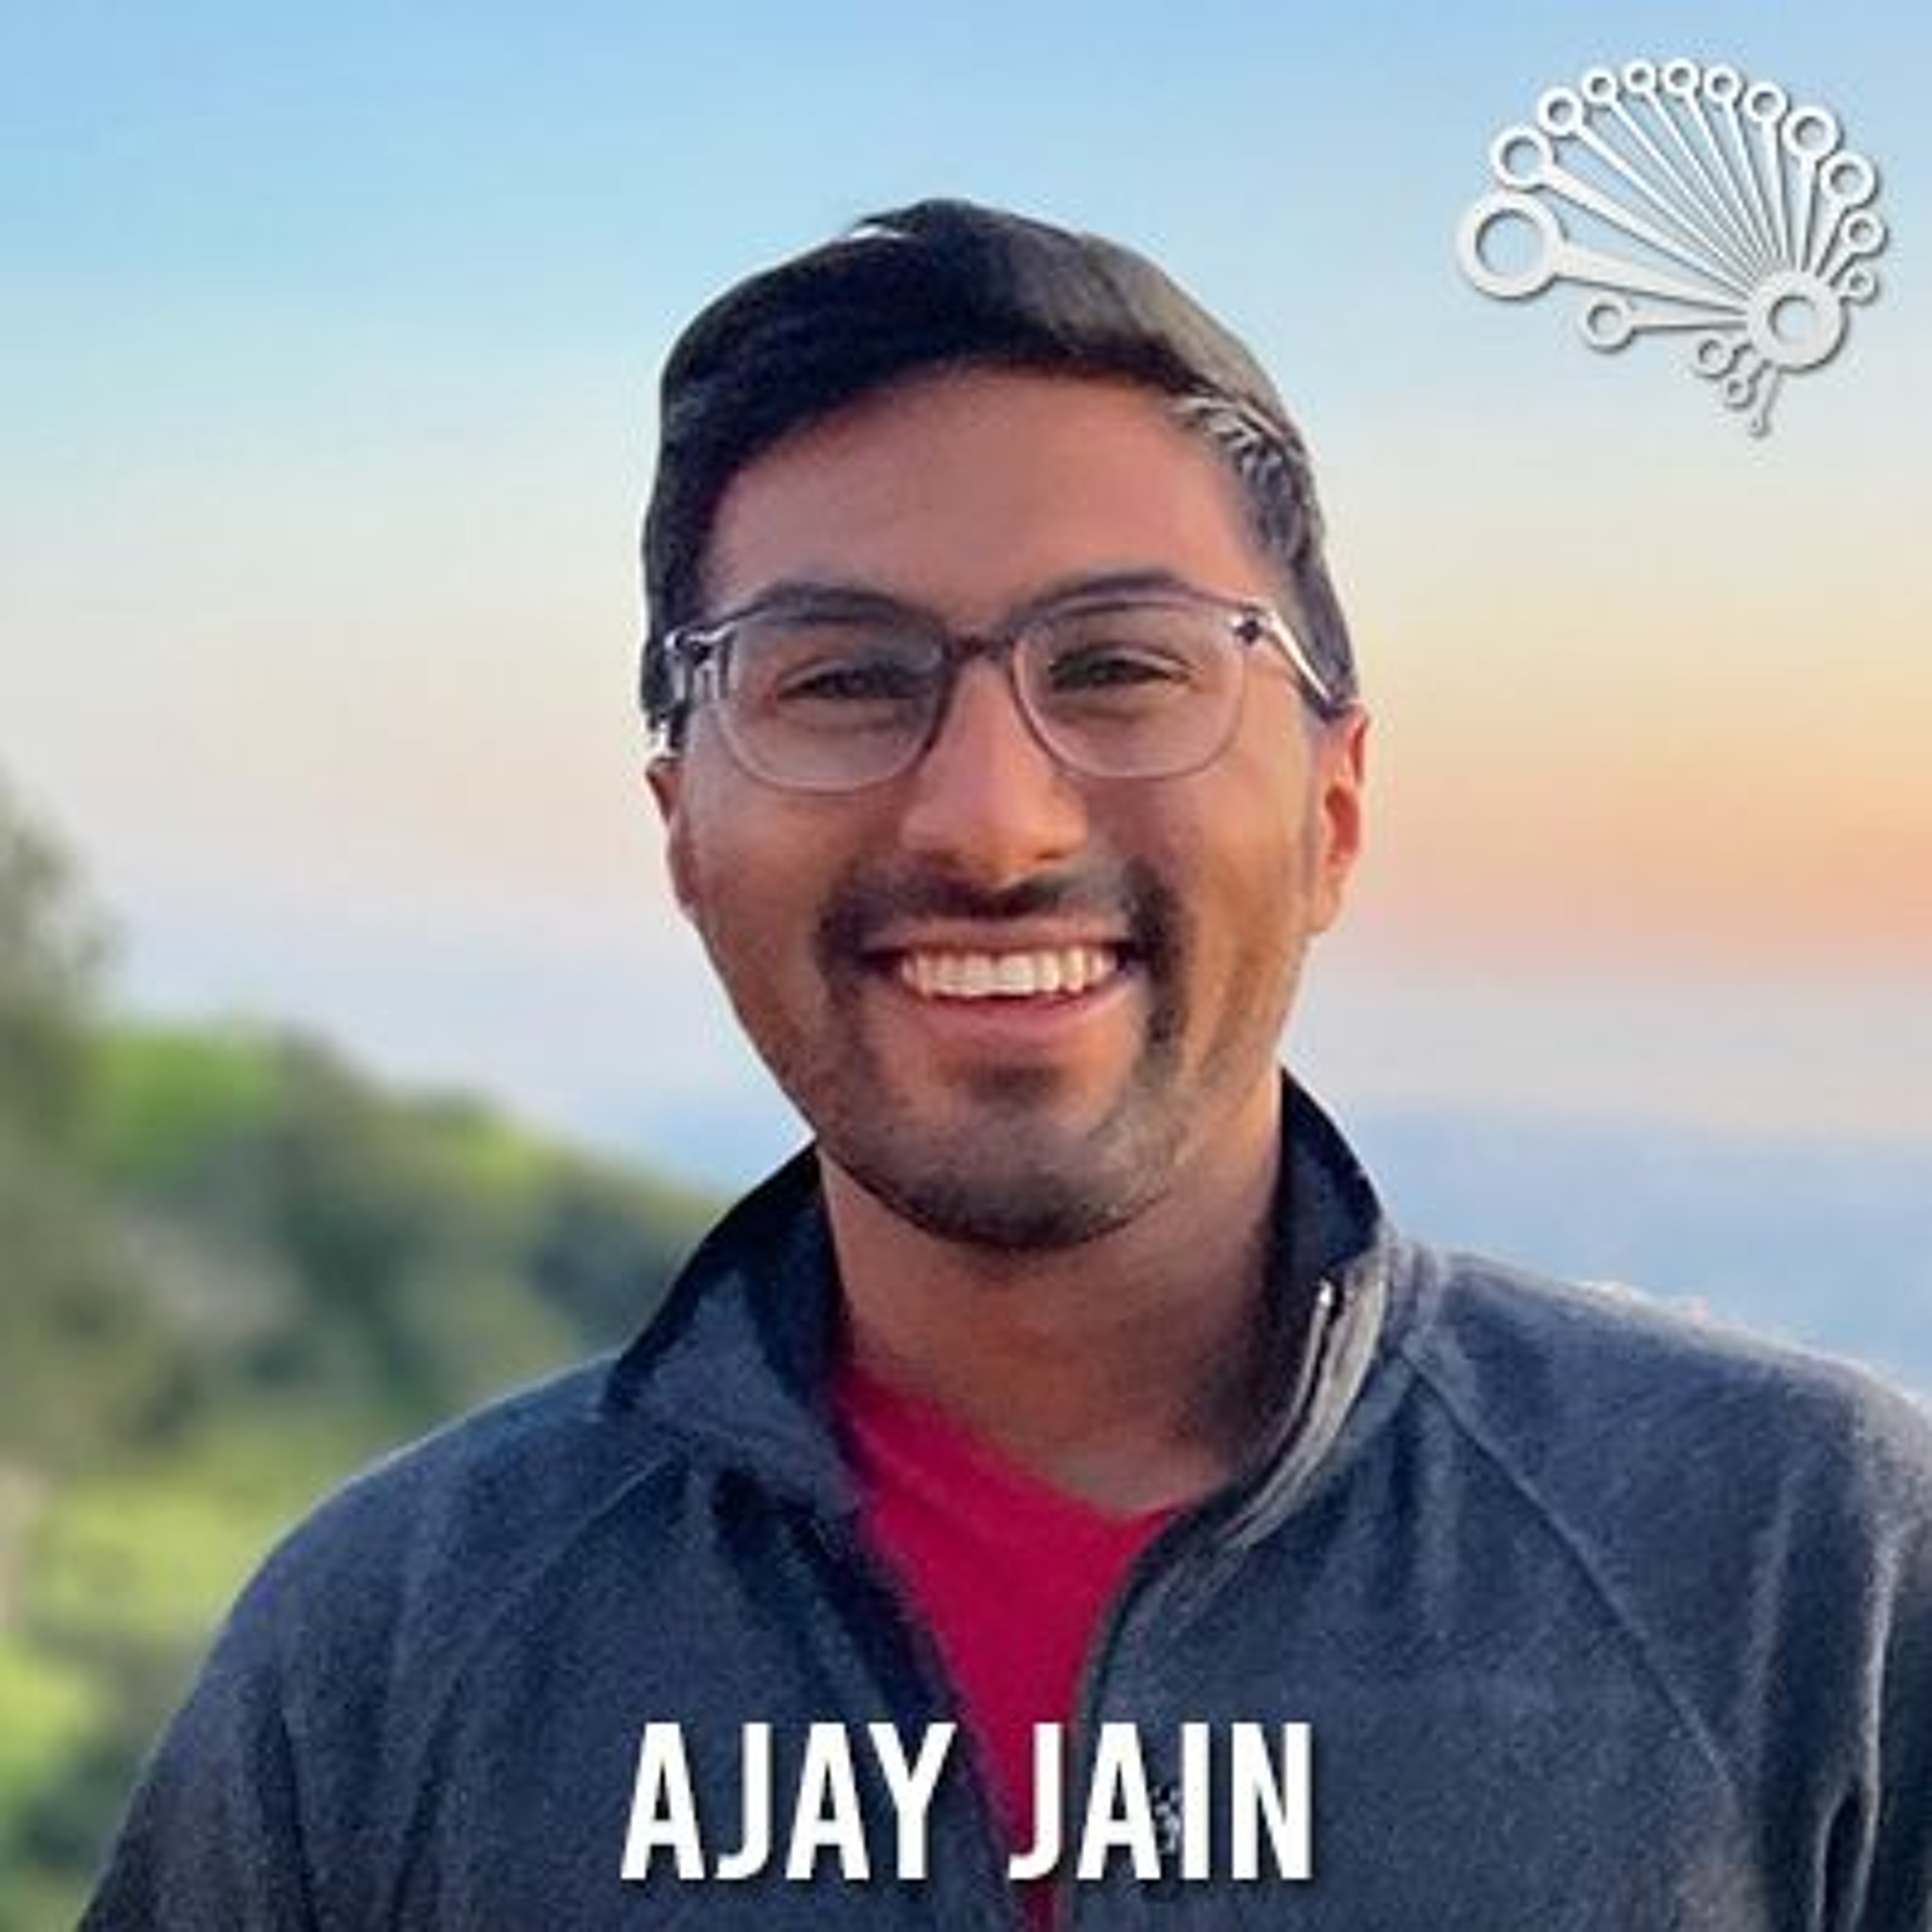 711: Image, Video and 3D-Model Generation from Natural Language, with Dr. Ajay Jain